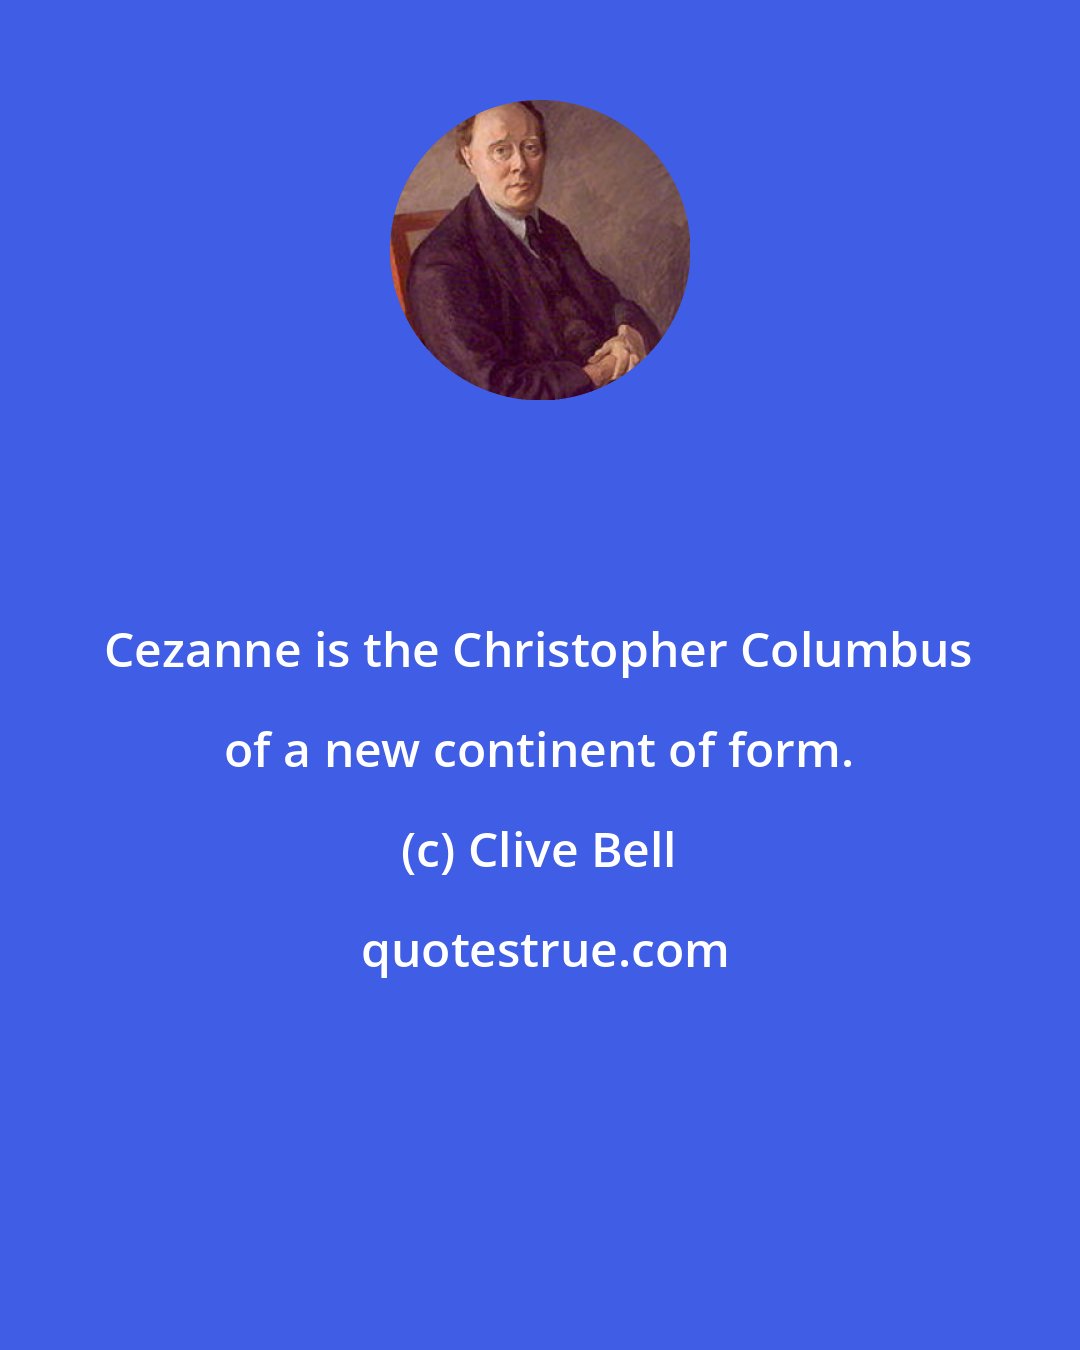 Clive Bell: Cezanne is the Christopher Columbus of a new continent of form.